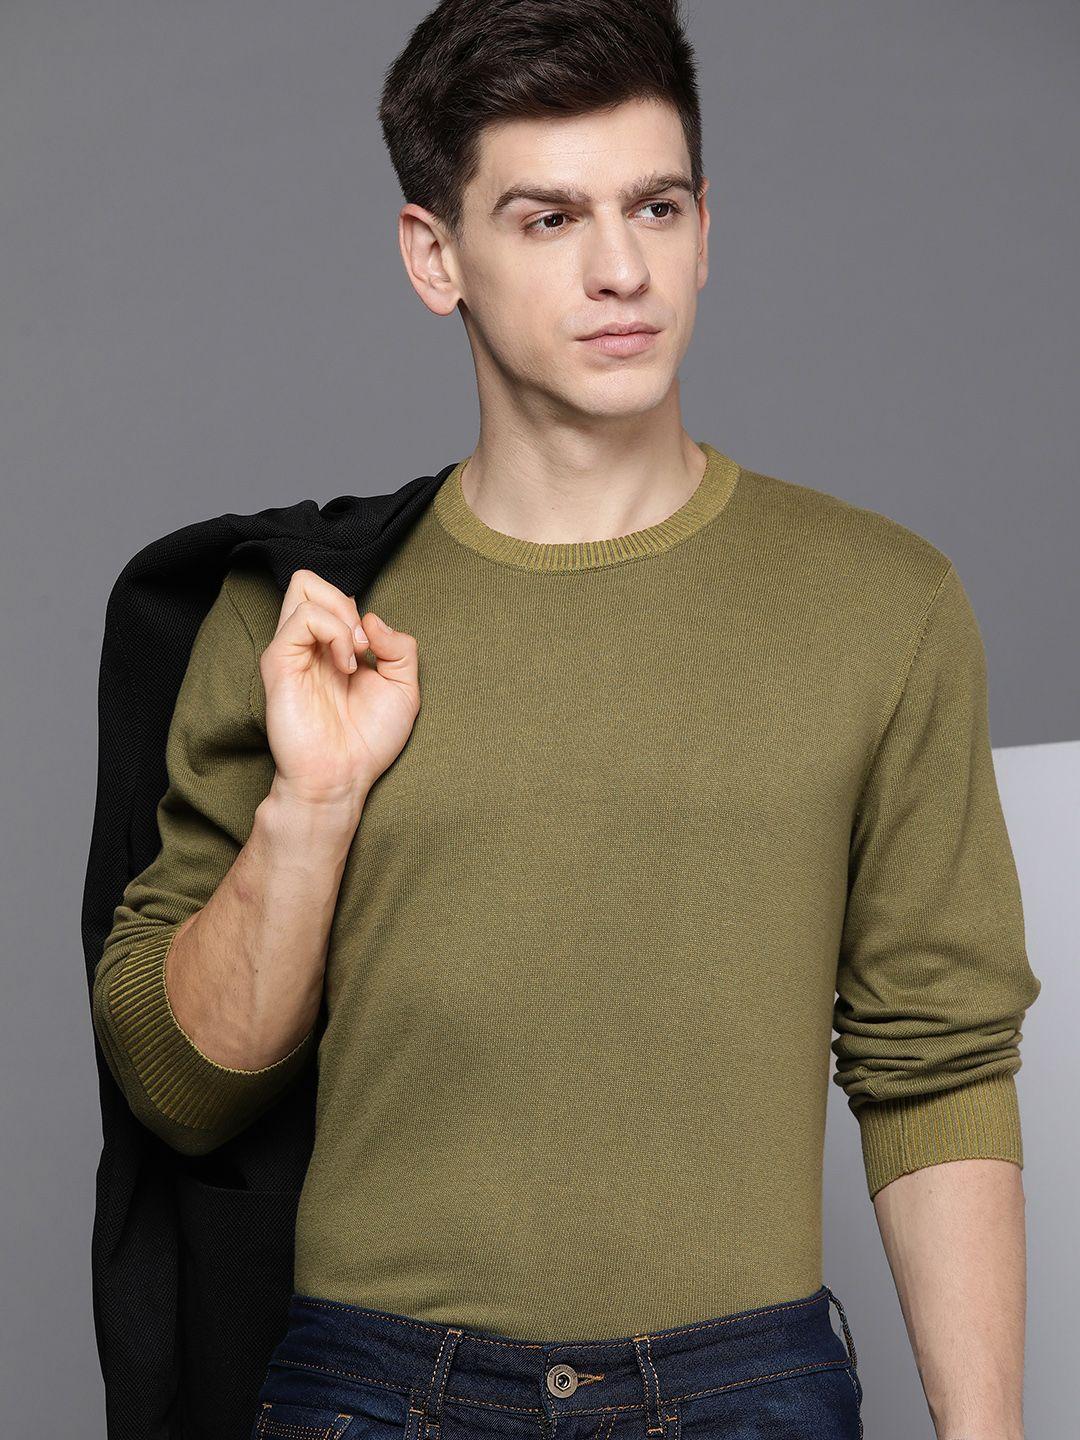 kenneth-cole-men-olive-green-solid-pure-cotton-pullover-sweater